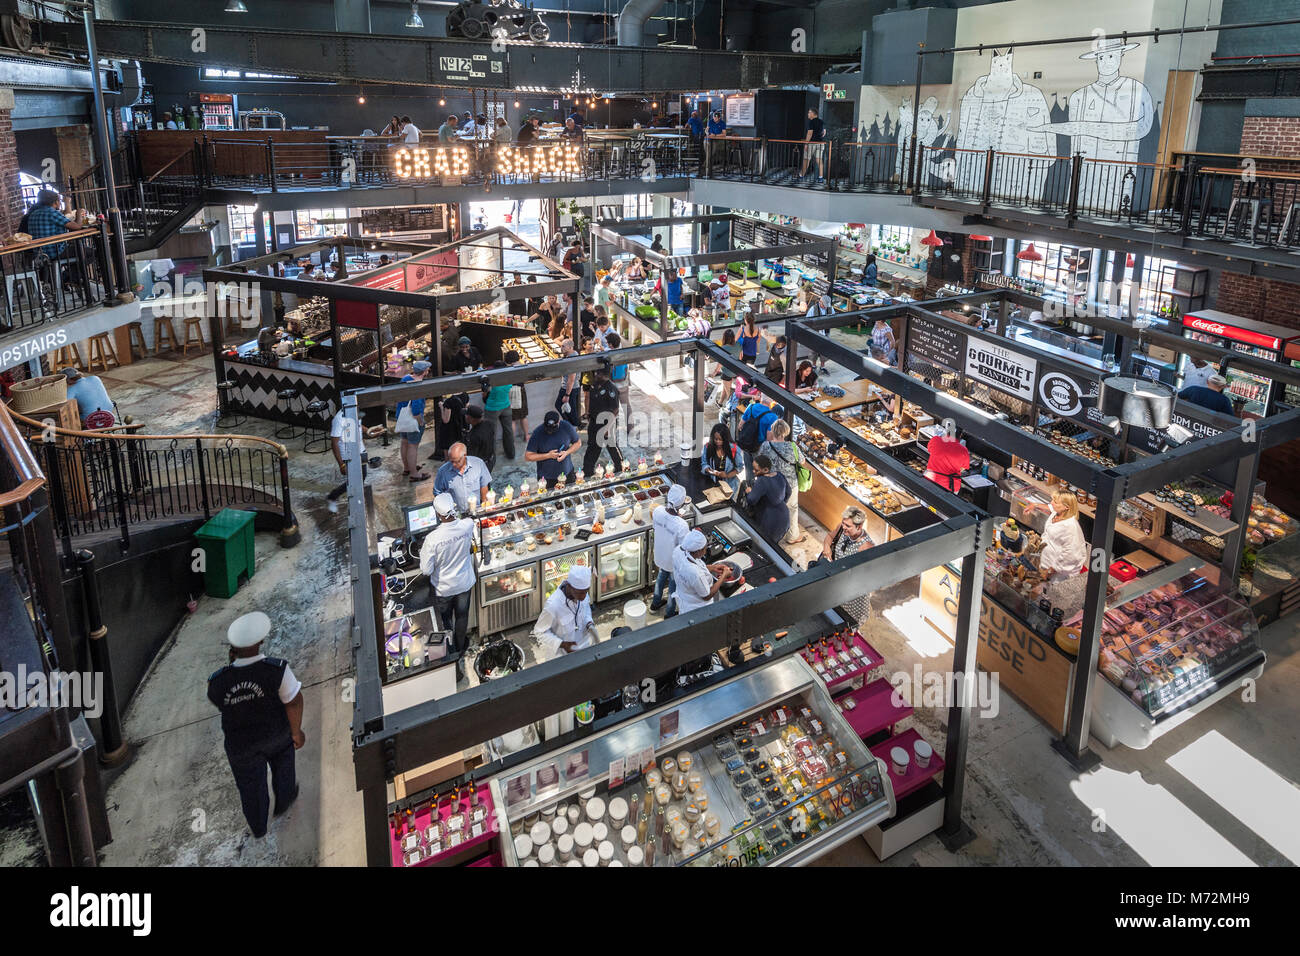 The V&A Food Market of the Cape Town Waterfront. Stock Photo